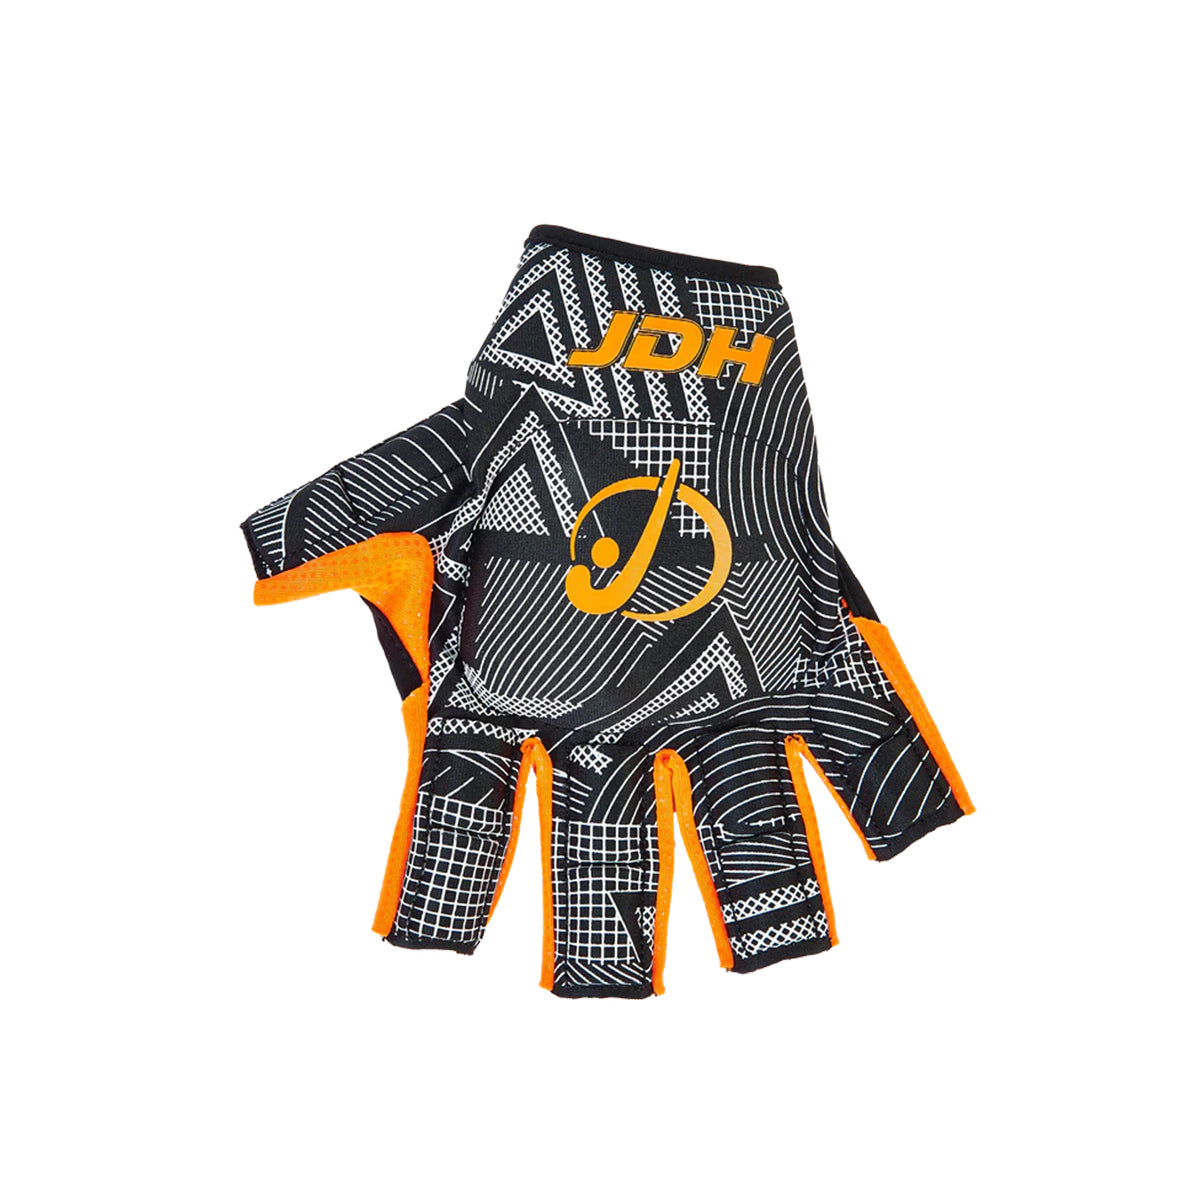 Pro Glove Double Knuckle